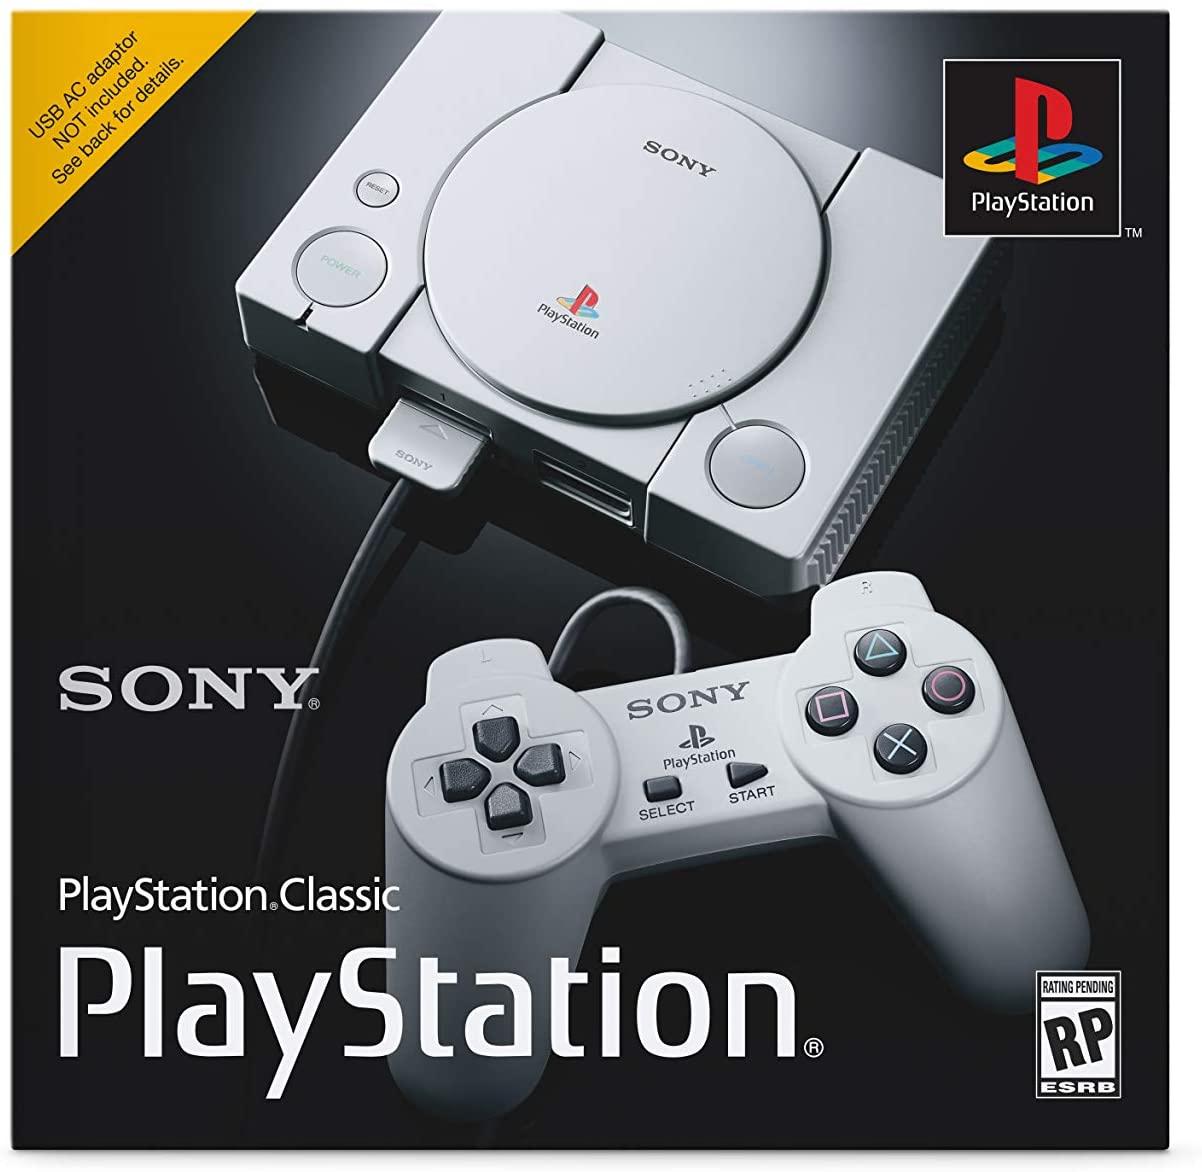 SONY PlayStation Classic (SCPH-1000RE),2 wired joystick, HDMI cable, USB cable, microUSB, SON-SCPH1000RE